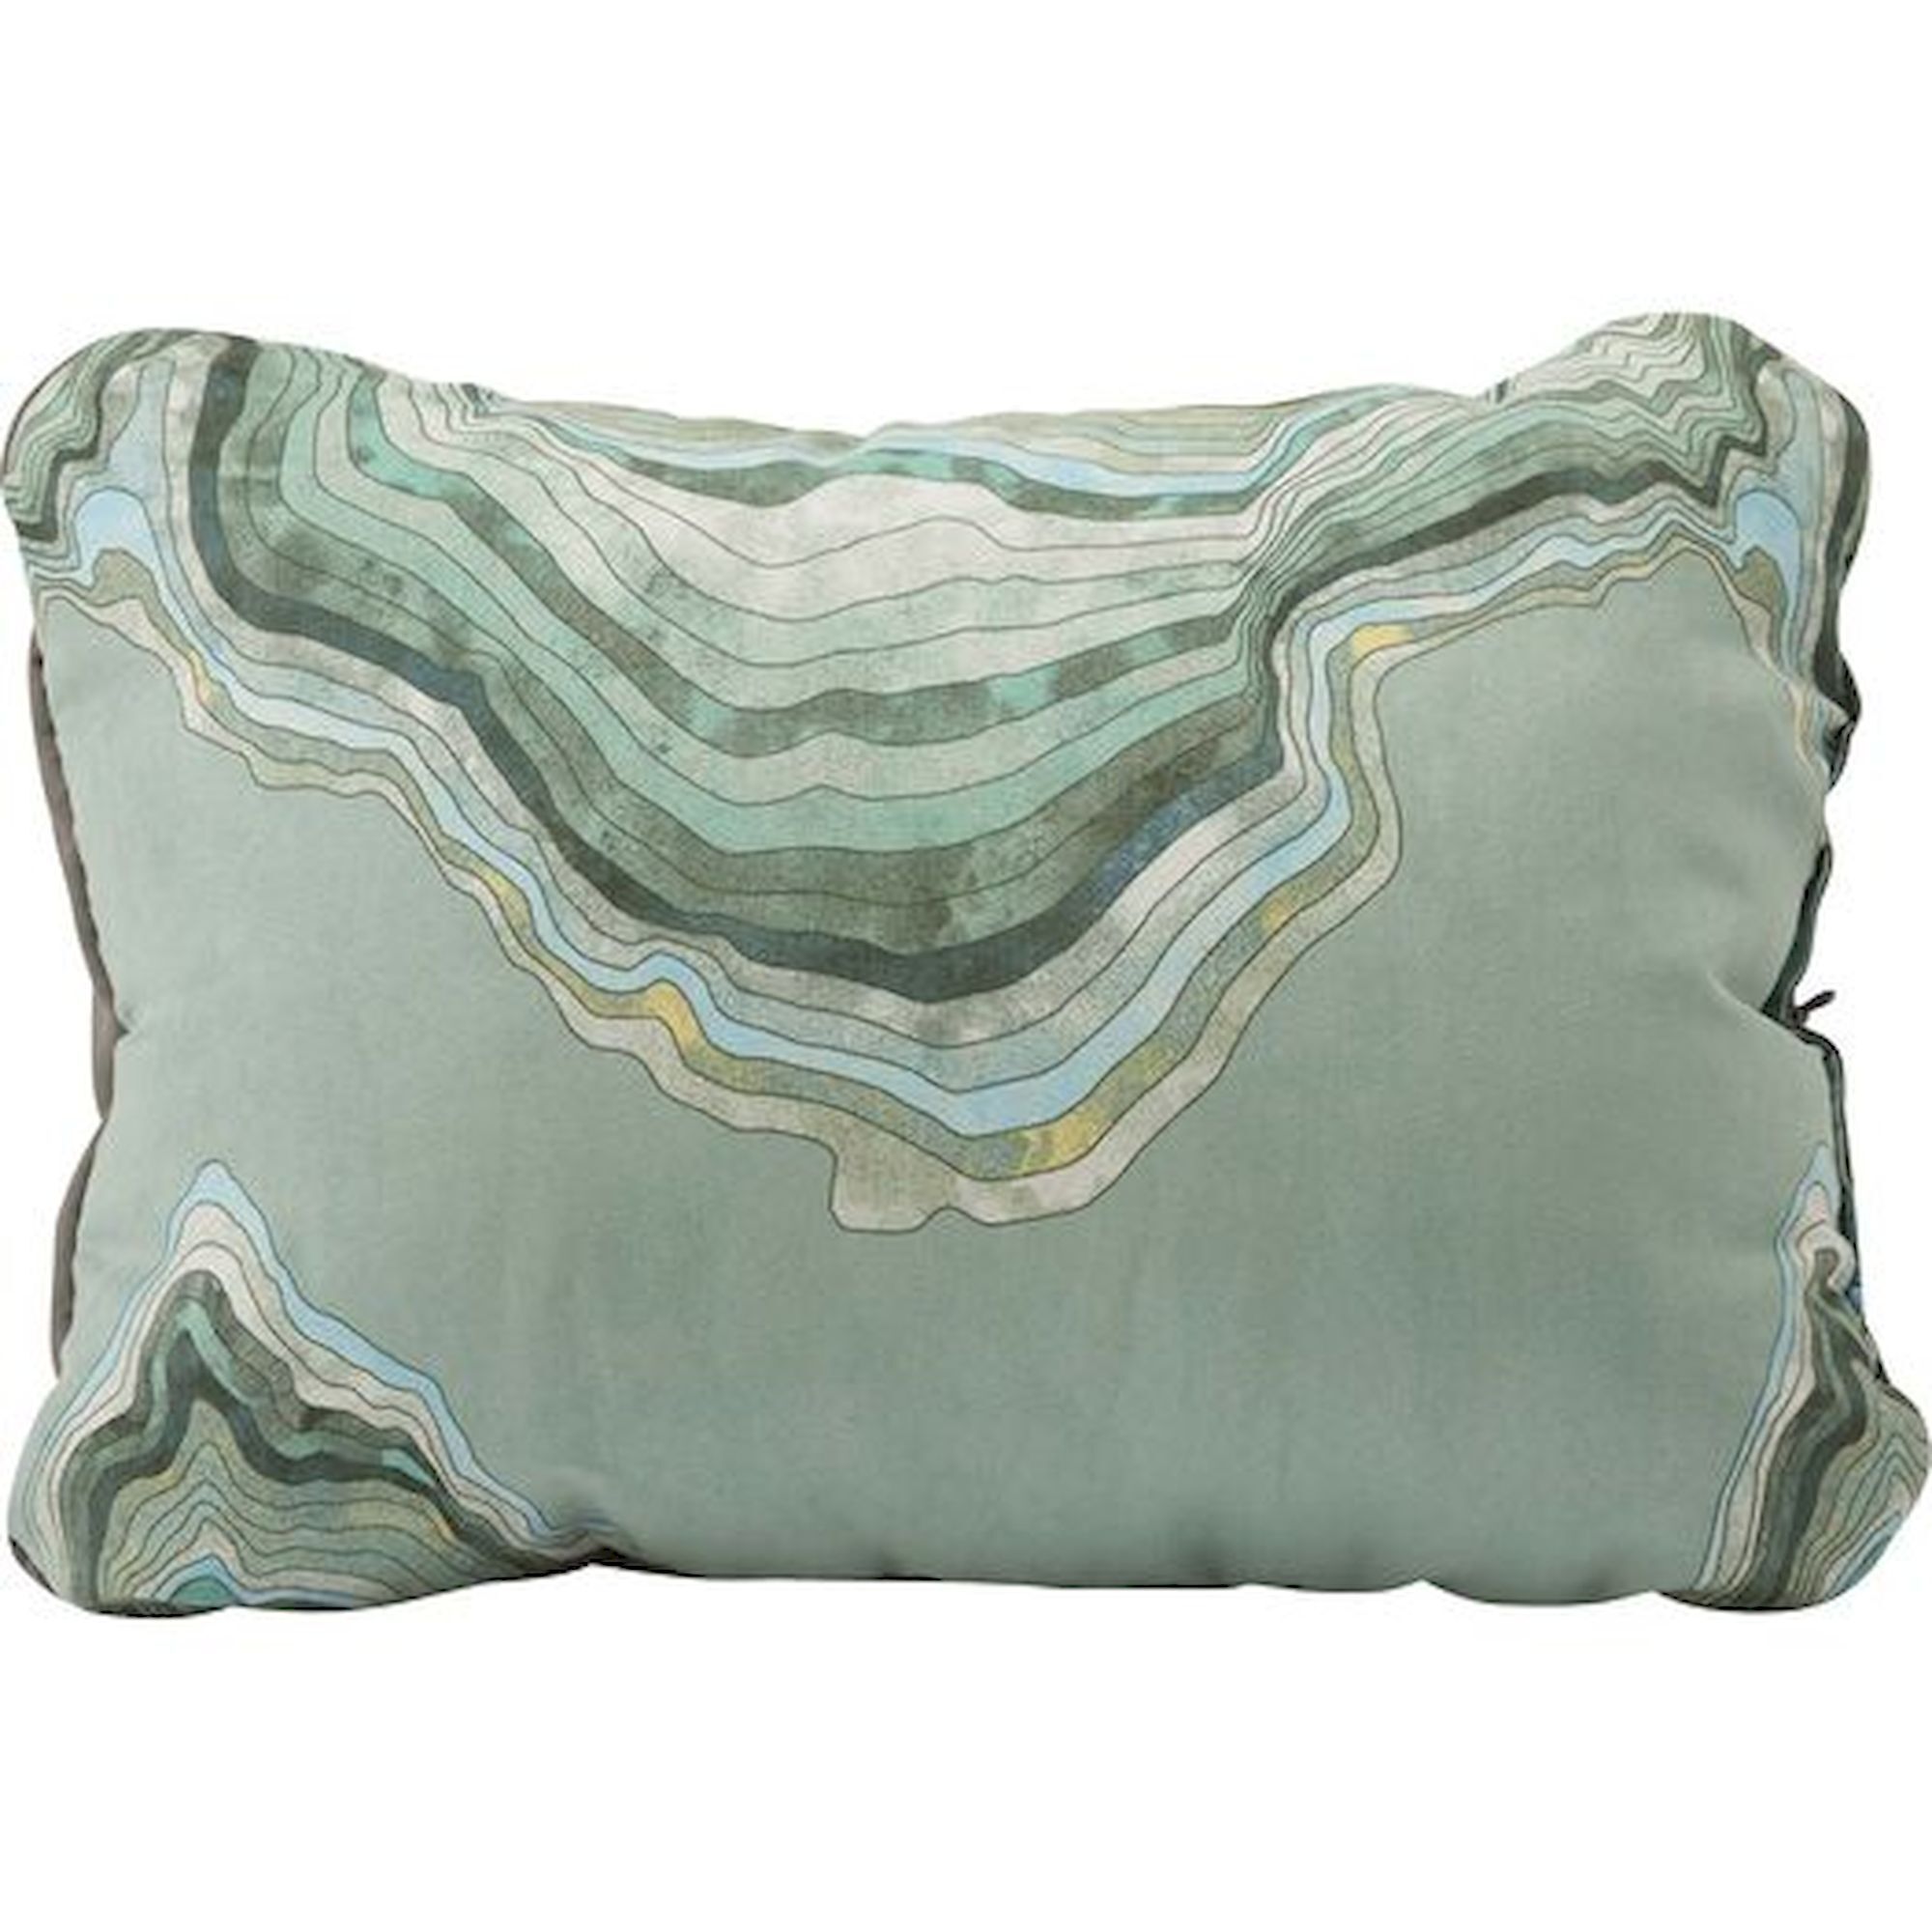 Thermarest Compressible Pillow - Cojín